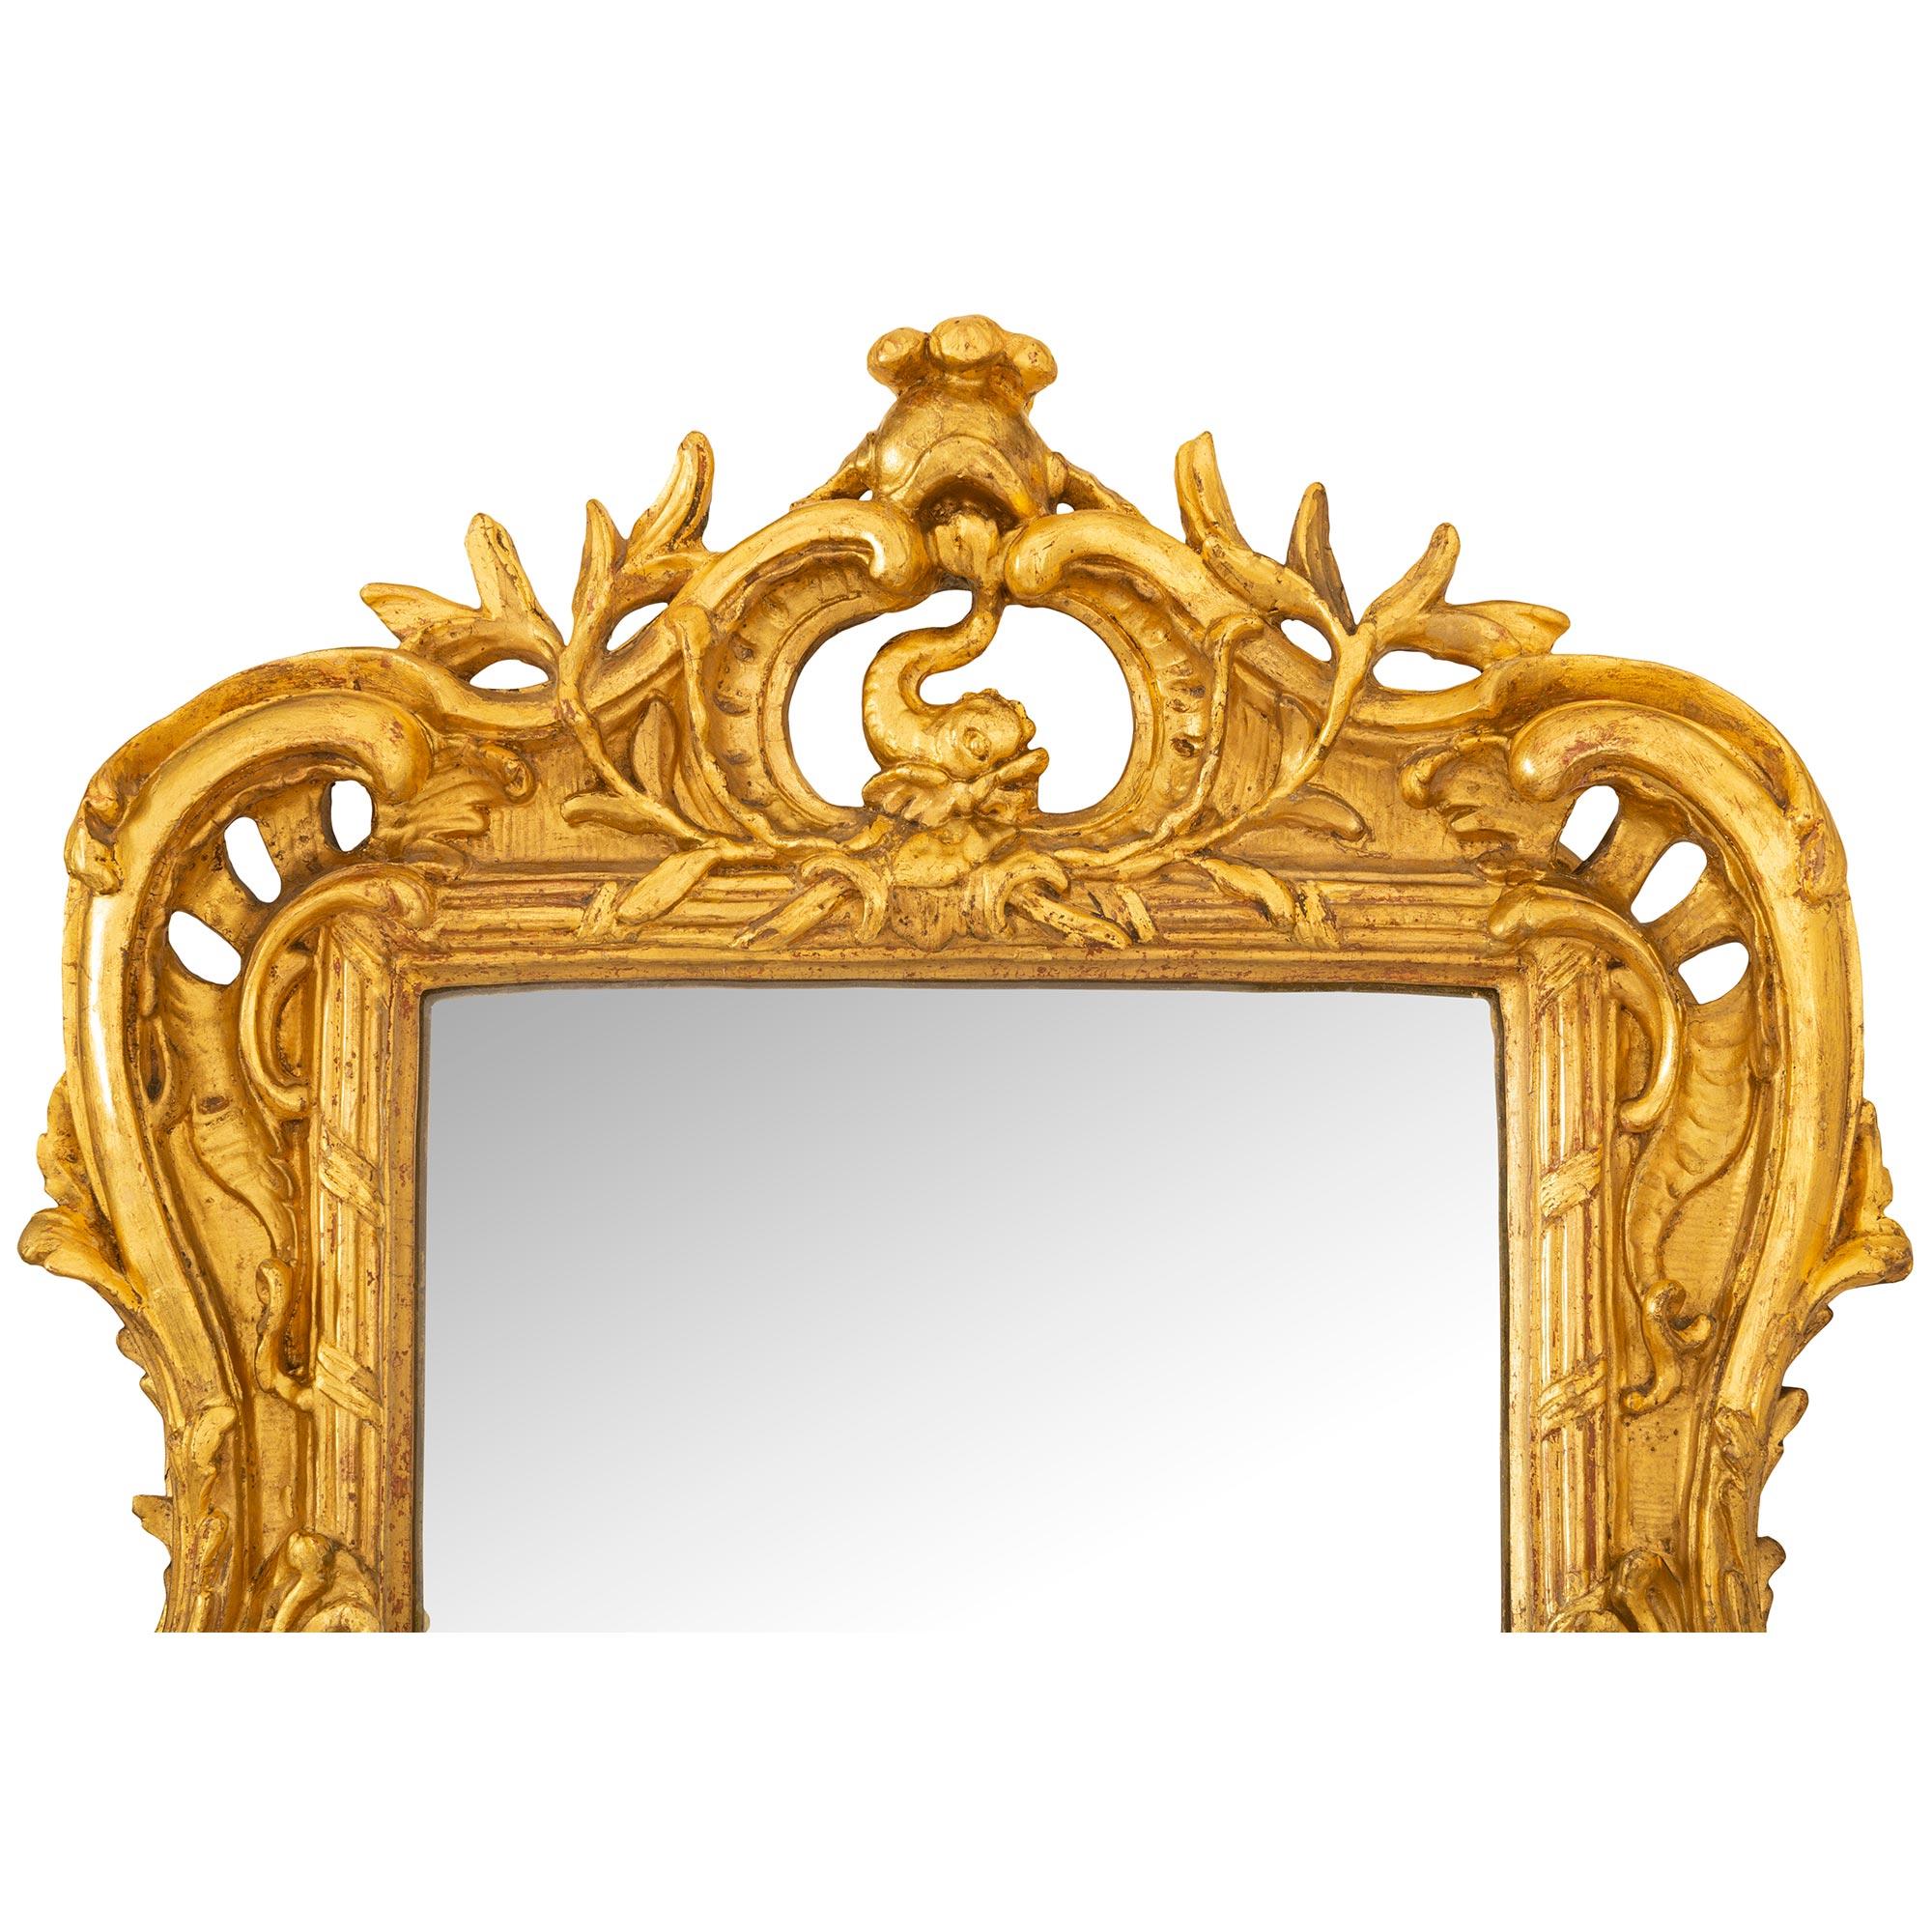 An exquisite and very high quality French mid 18th century Louis XV period giltwood mirror possibly created for Royal nobility. The beautiful small scale mirror retains its original mirror plate set within an elegant wraparound tied fluted border.